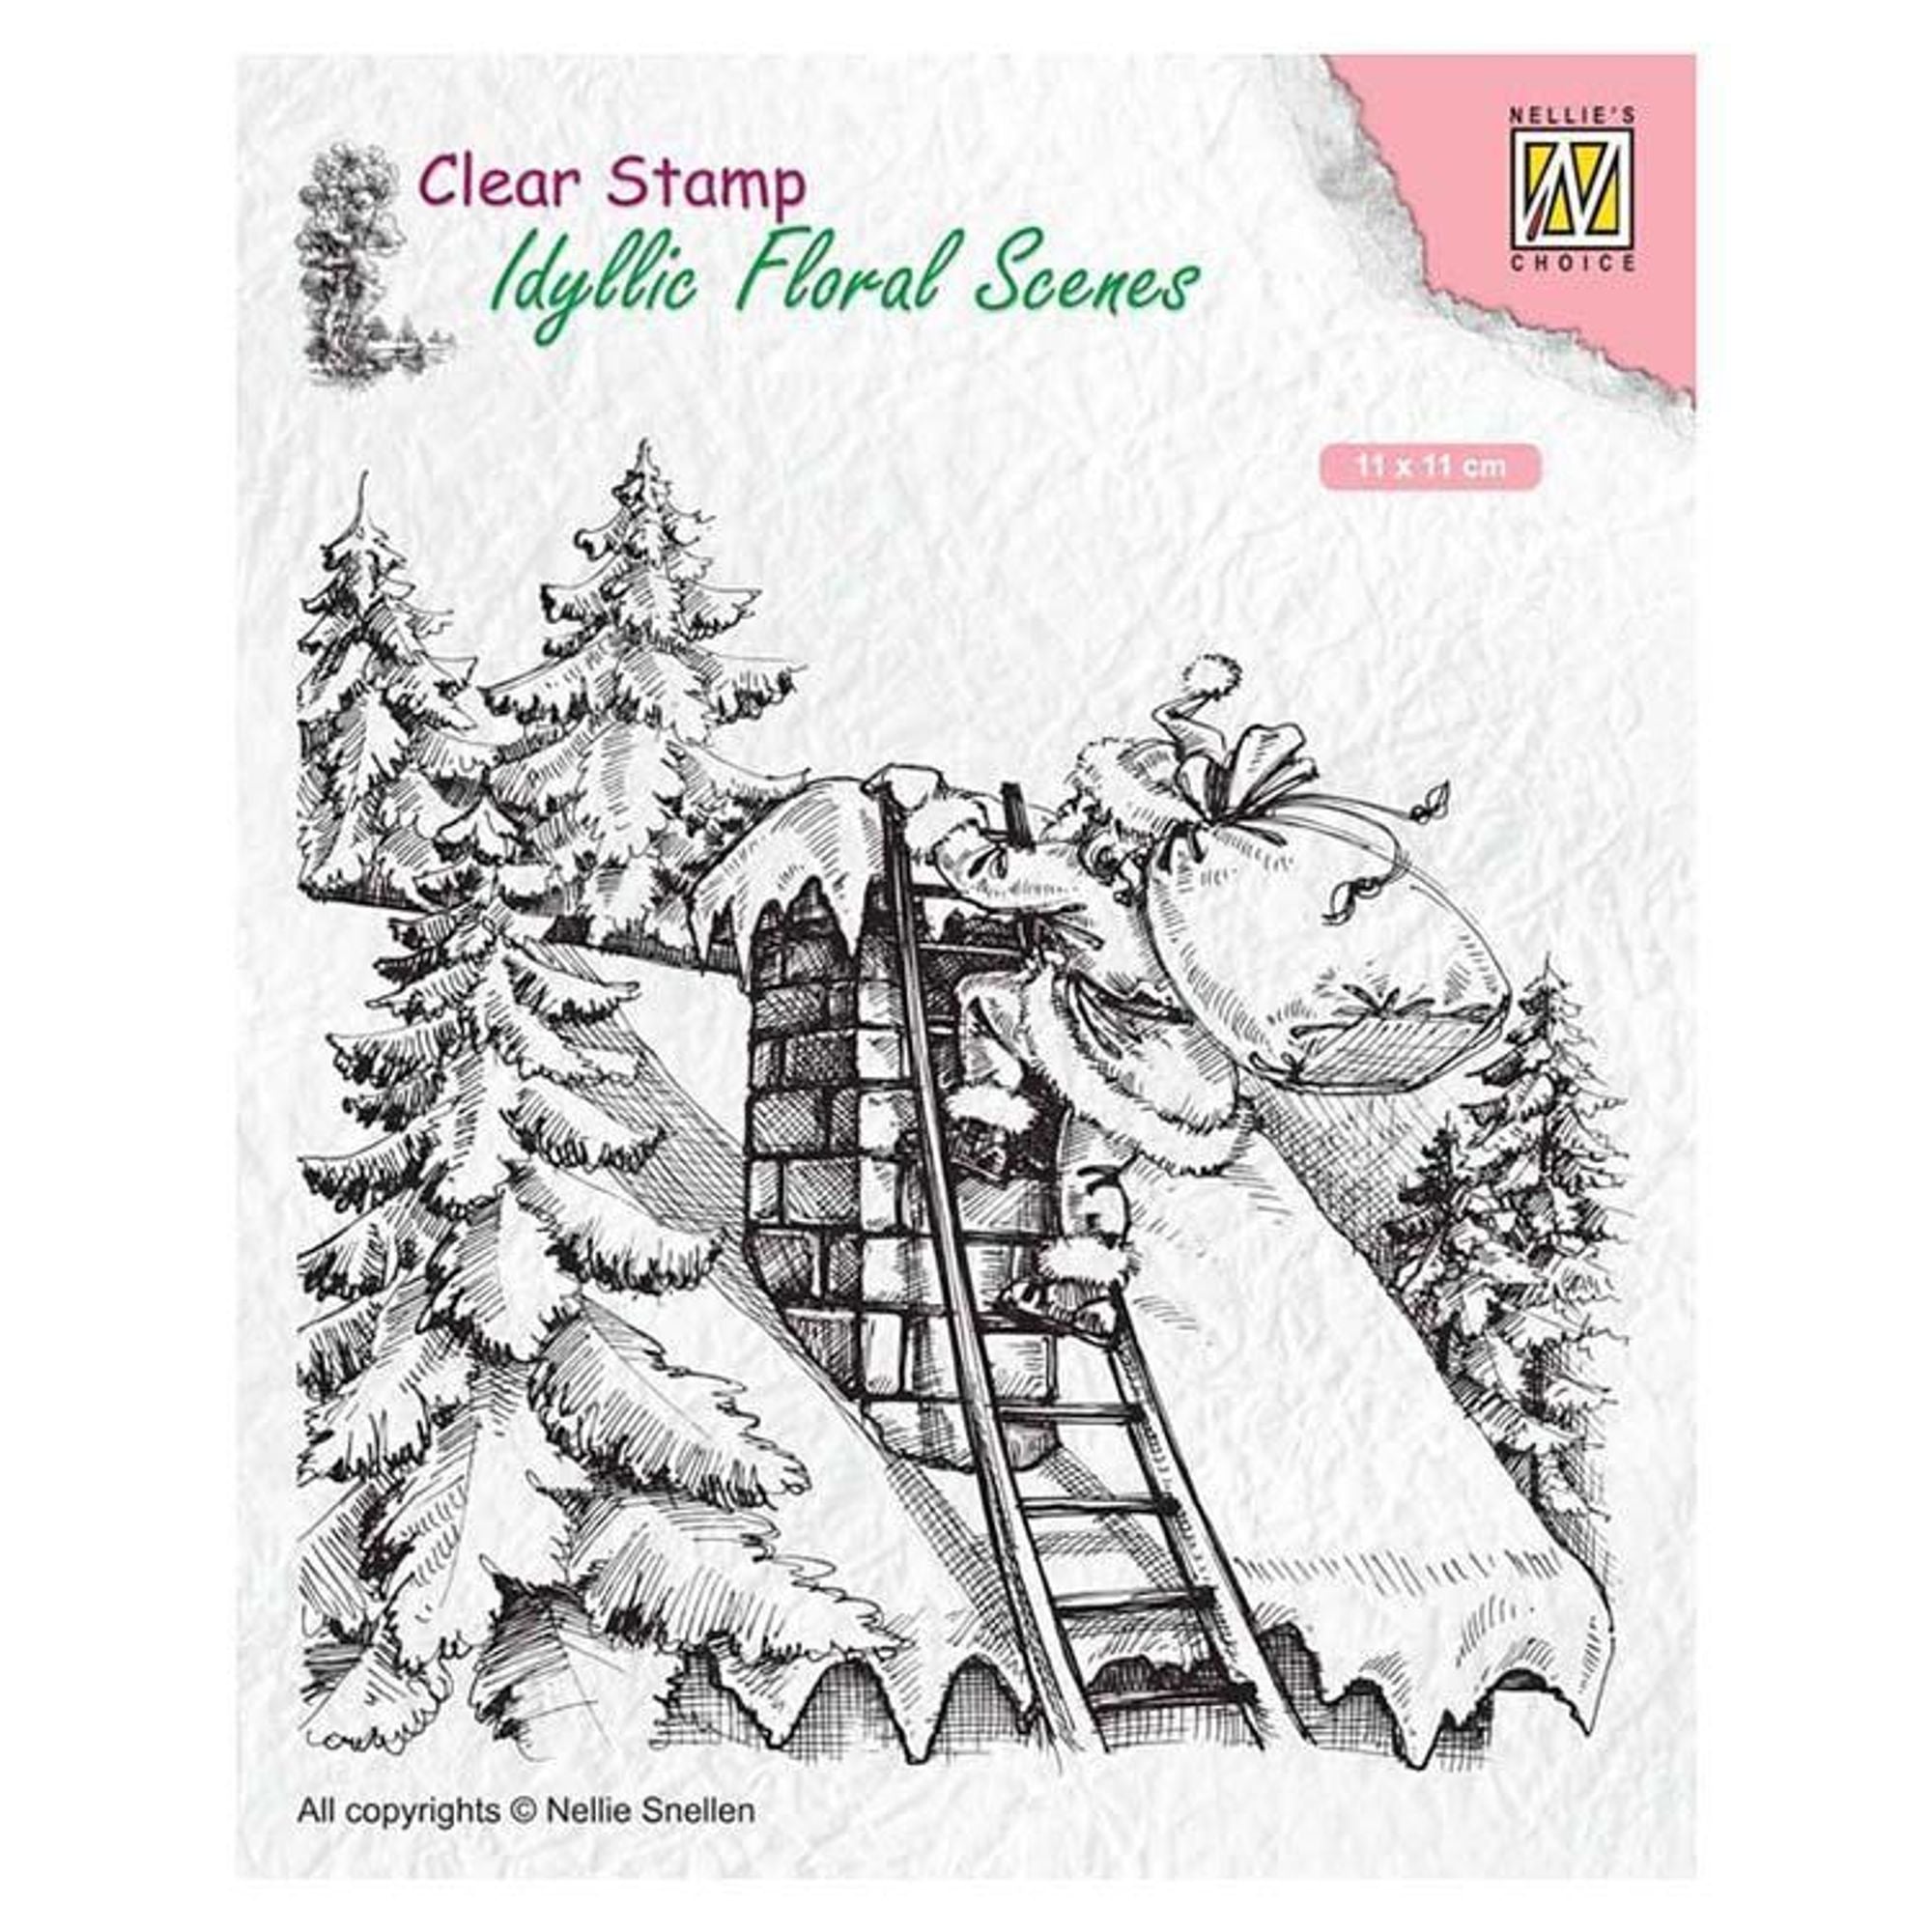 Nellie's Choice Clear Stamp Santa Claus at Work